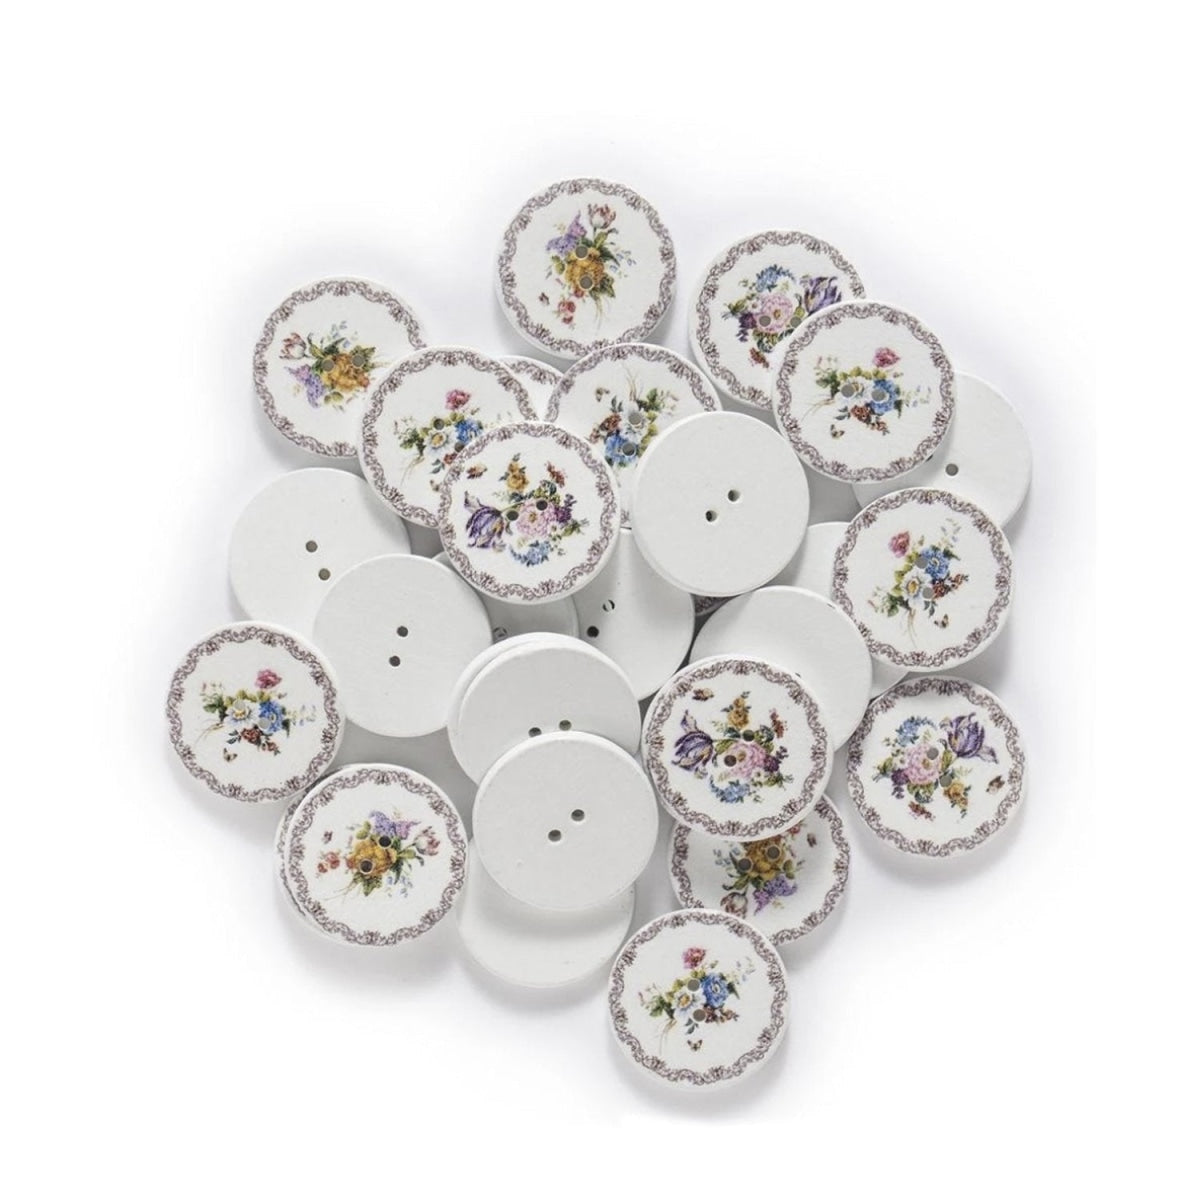 50Pcs Flower Retro Series White Wood Buttons Sewing Scrapbook Clothing 15-25Mm 20Mm